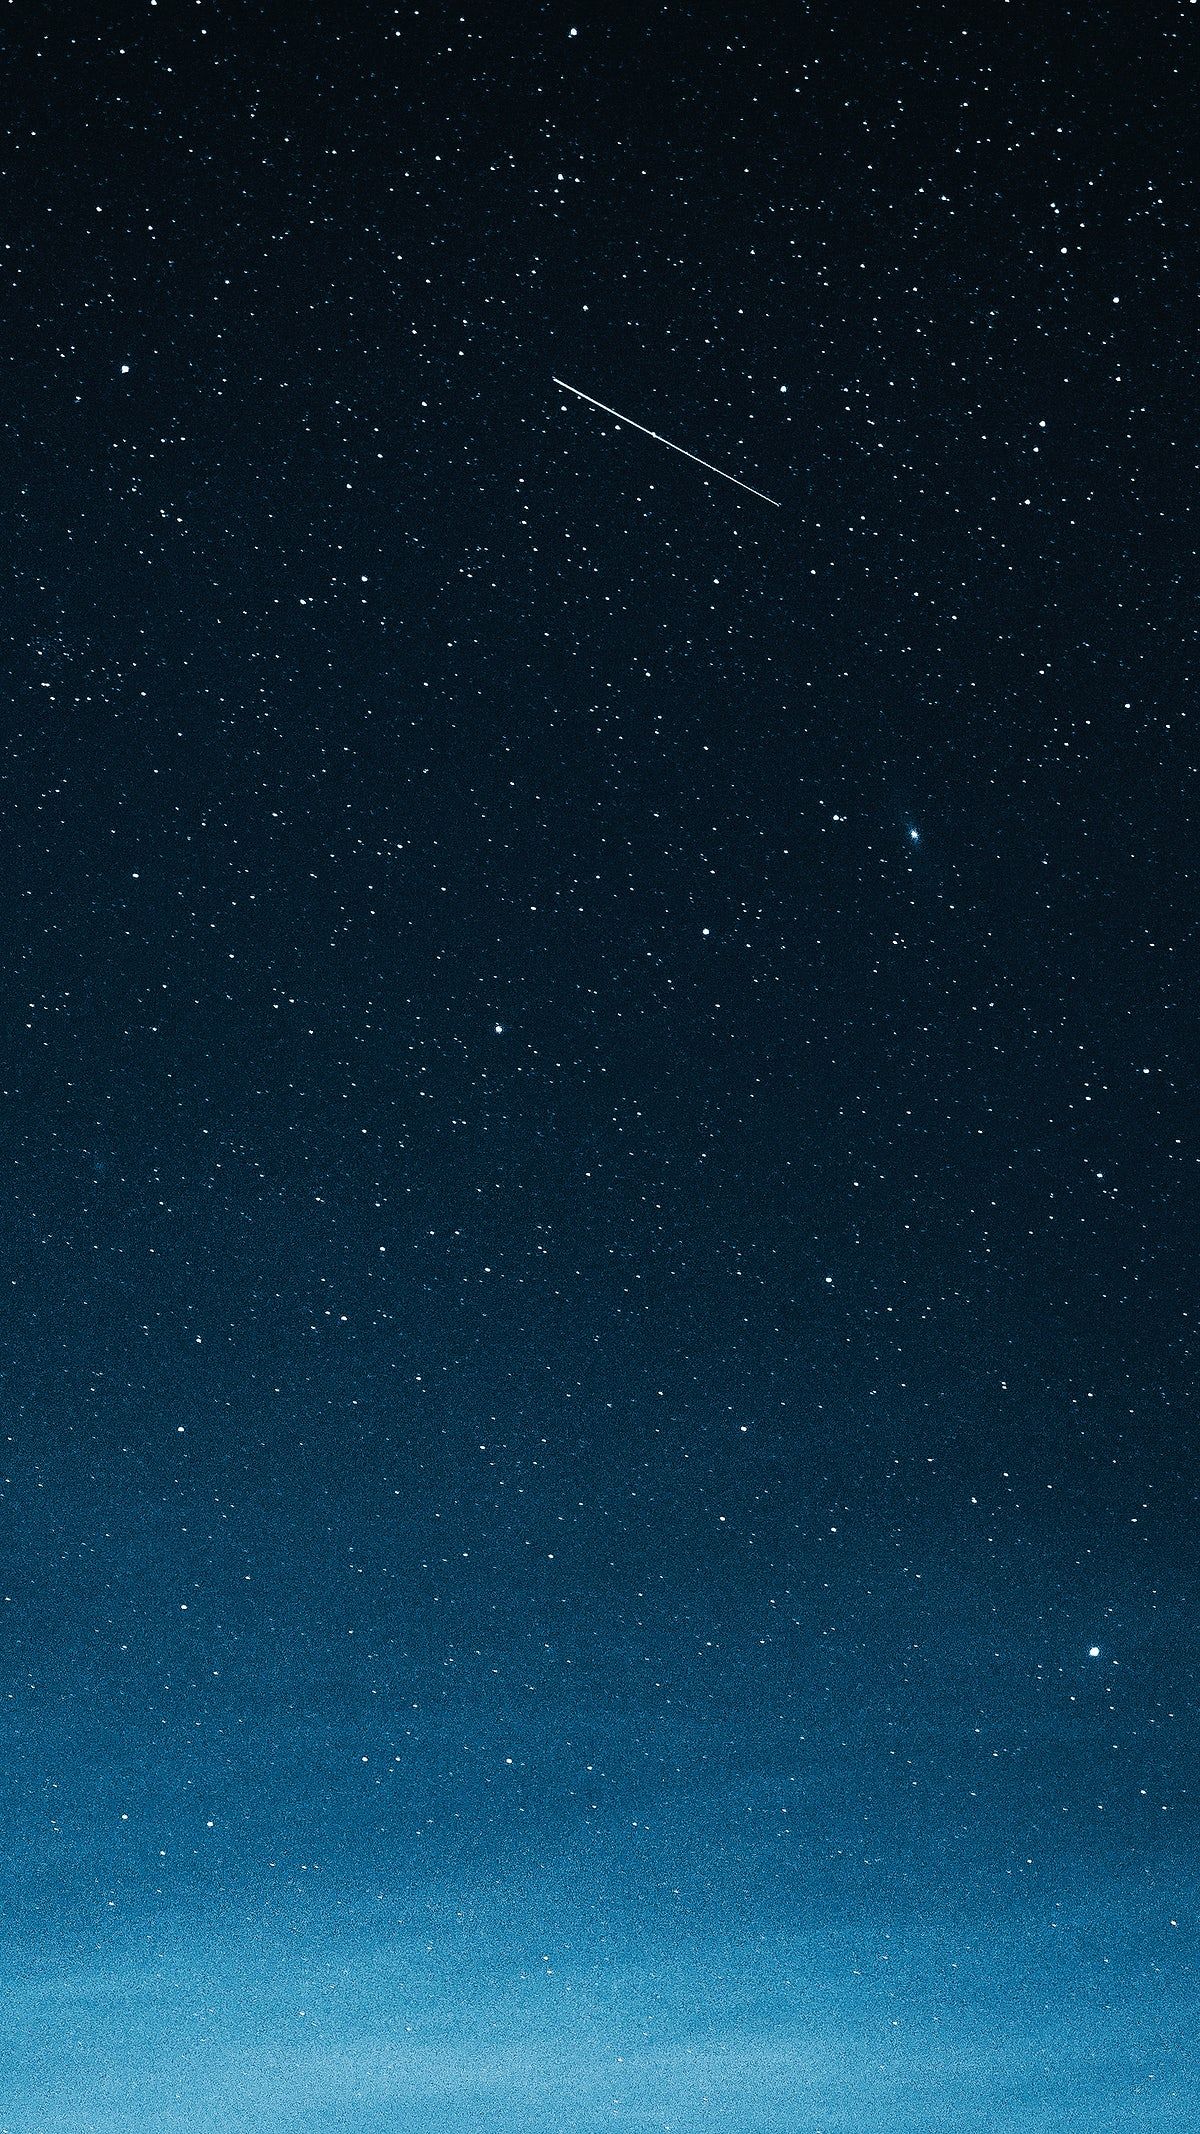 Download premium image of Shooting star in the dark blue sky over Greenland by Luke Stackpoole about iphone wallpaper shooting star night sky iphone wallpaper dark and heaven 2315381